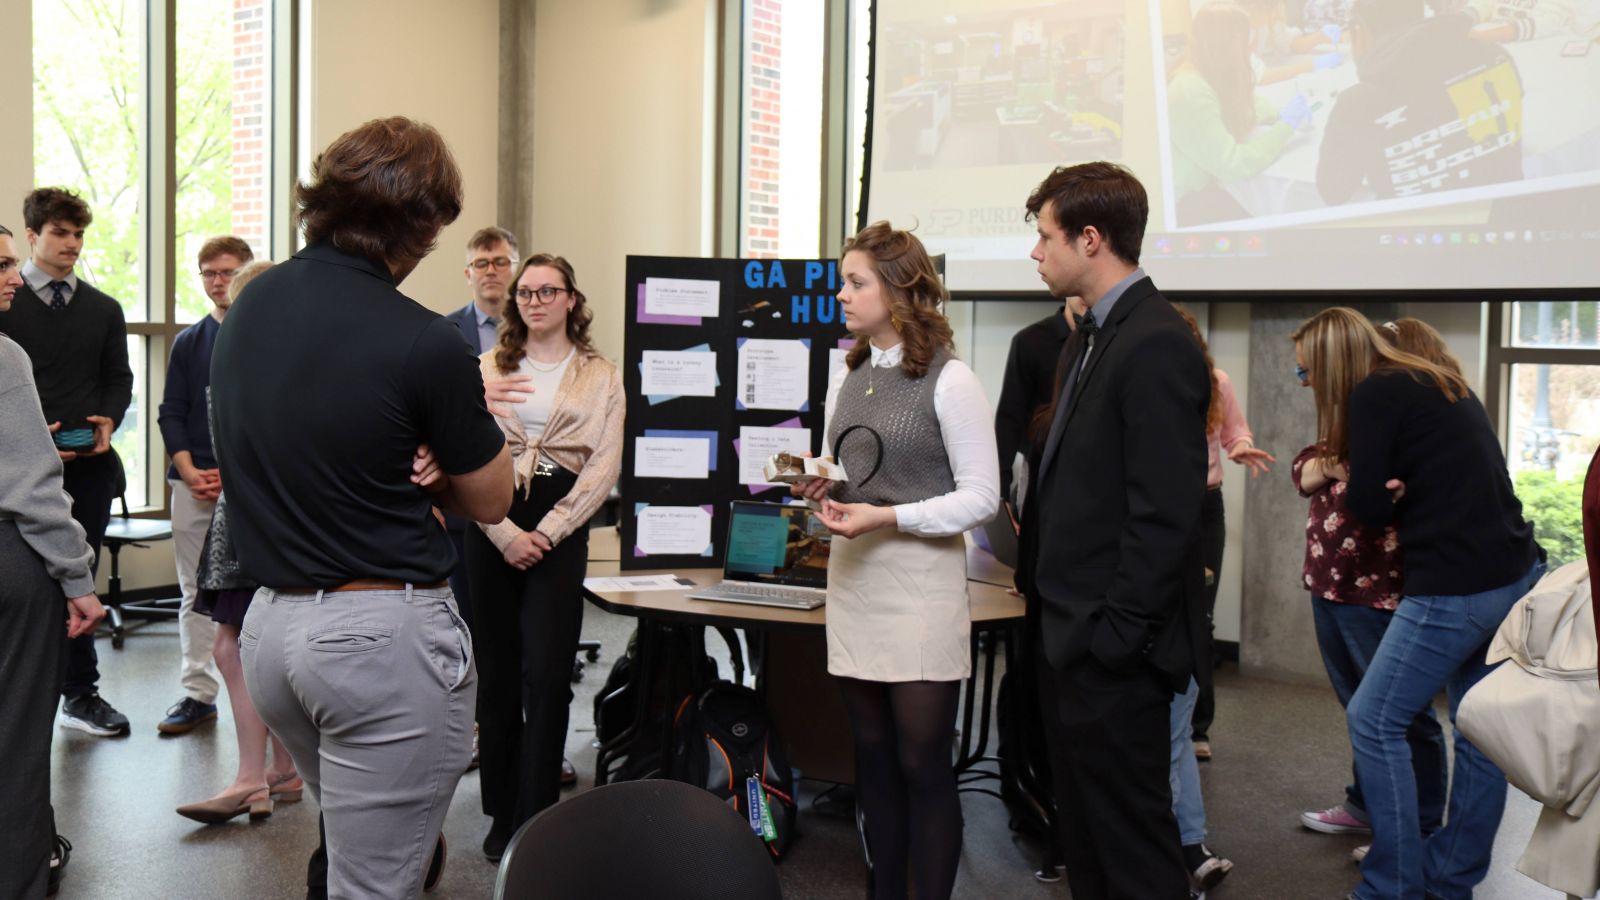 The Pilot HUD team presents their work at the Design and Innovation Challenge. (Purdue University photo/John O'Malley)